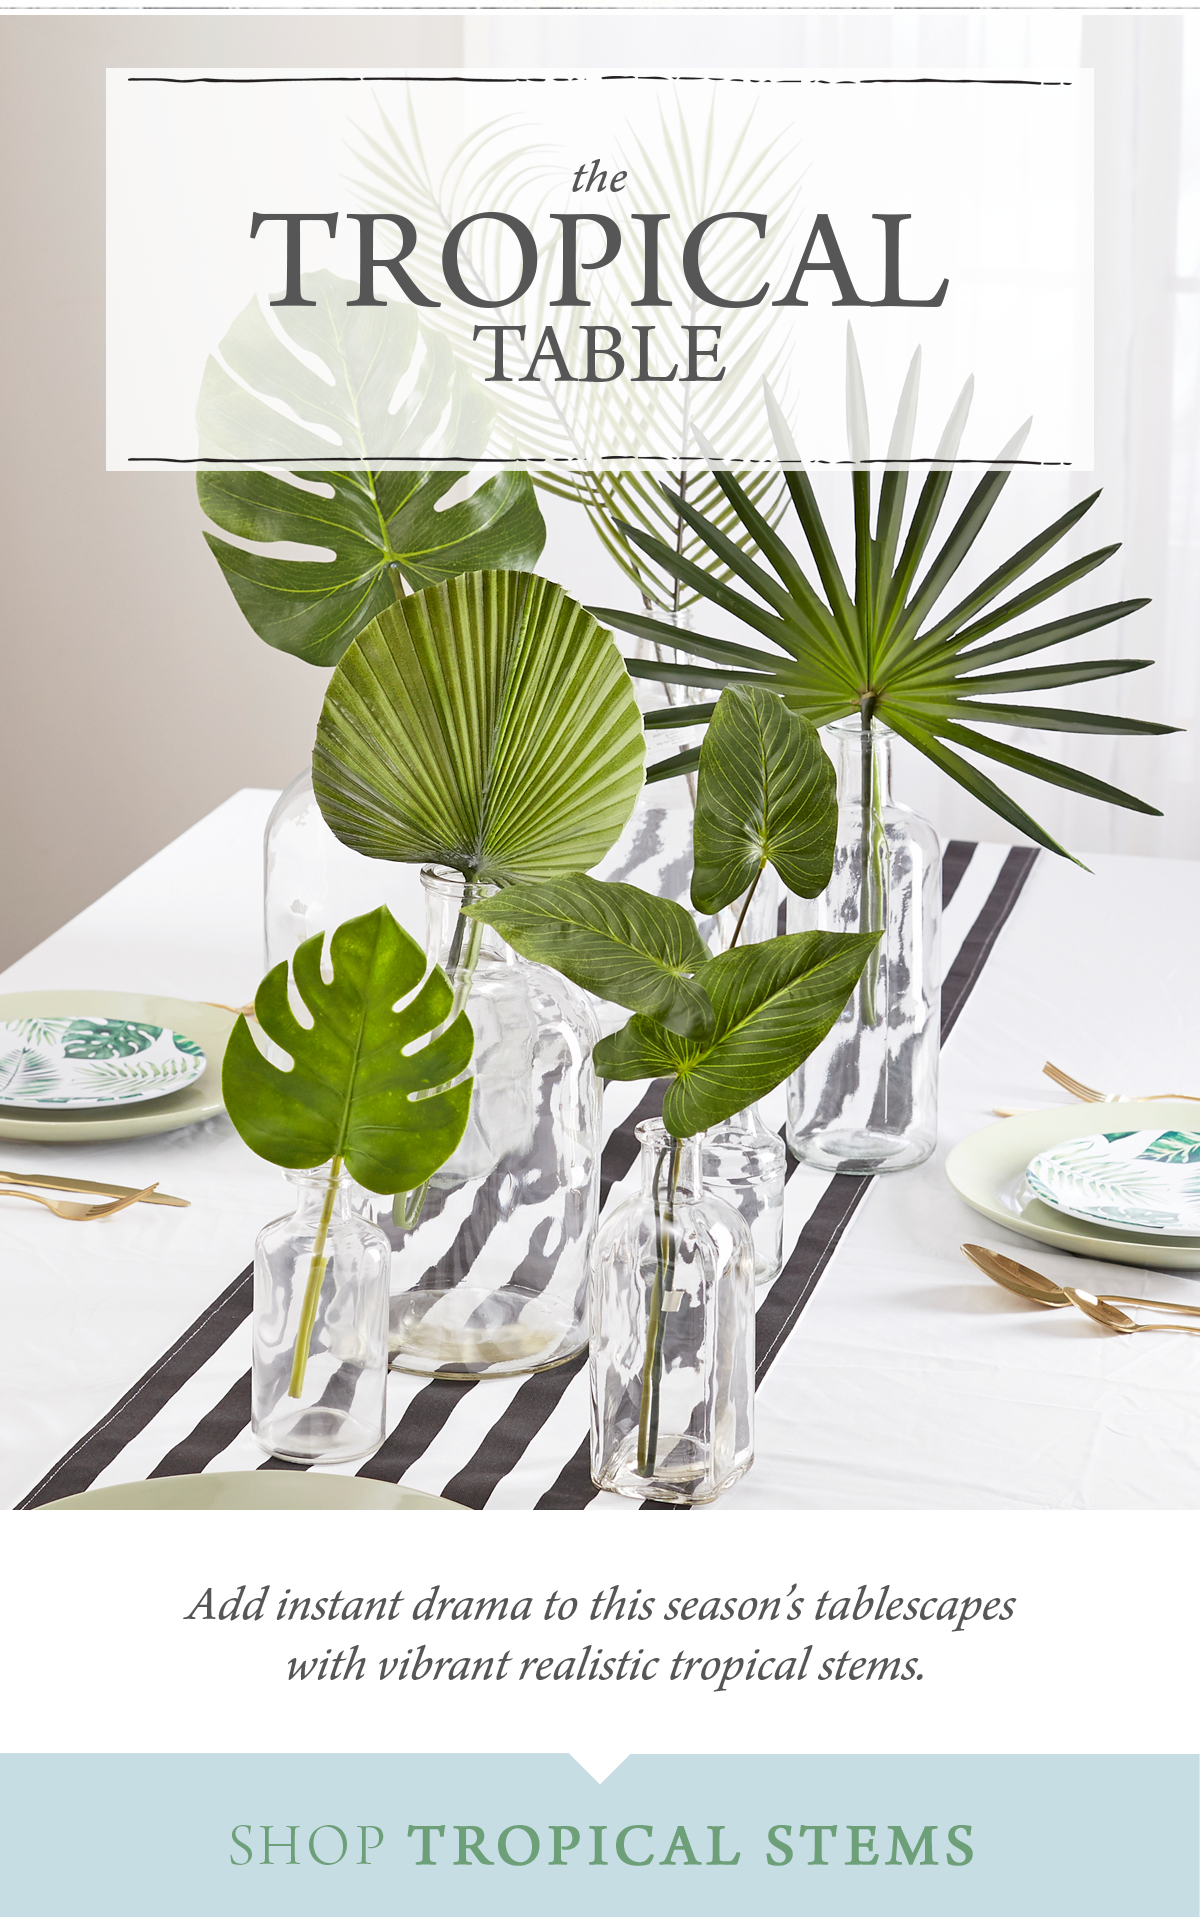 The Tropical Table Add instant drama to this season's tablescapes with vibrant realistic stems. SHOP TROPICAL STEMS